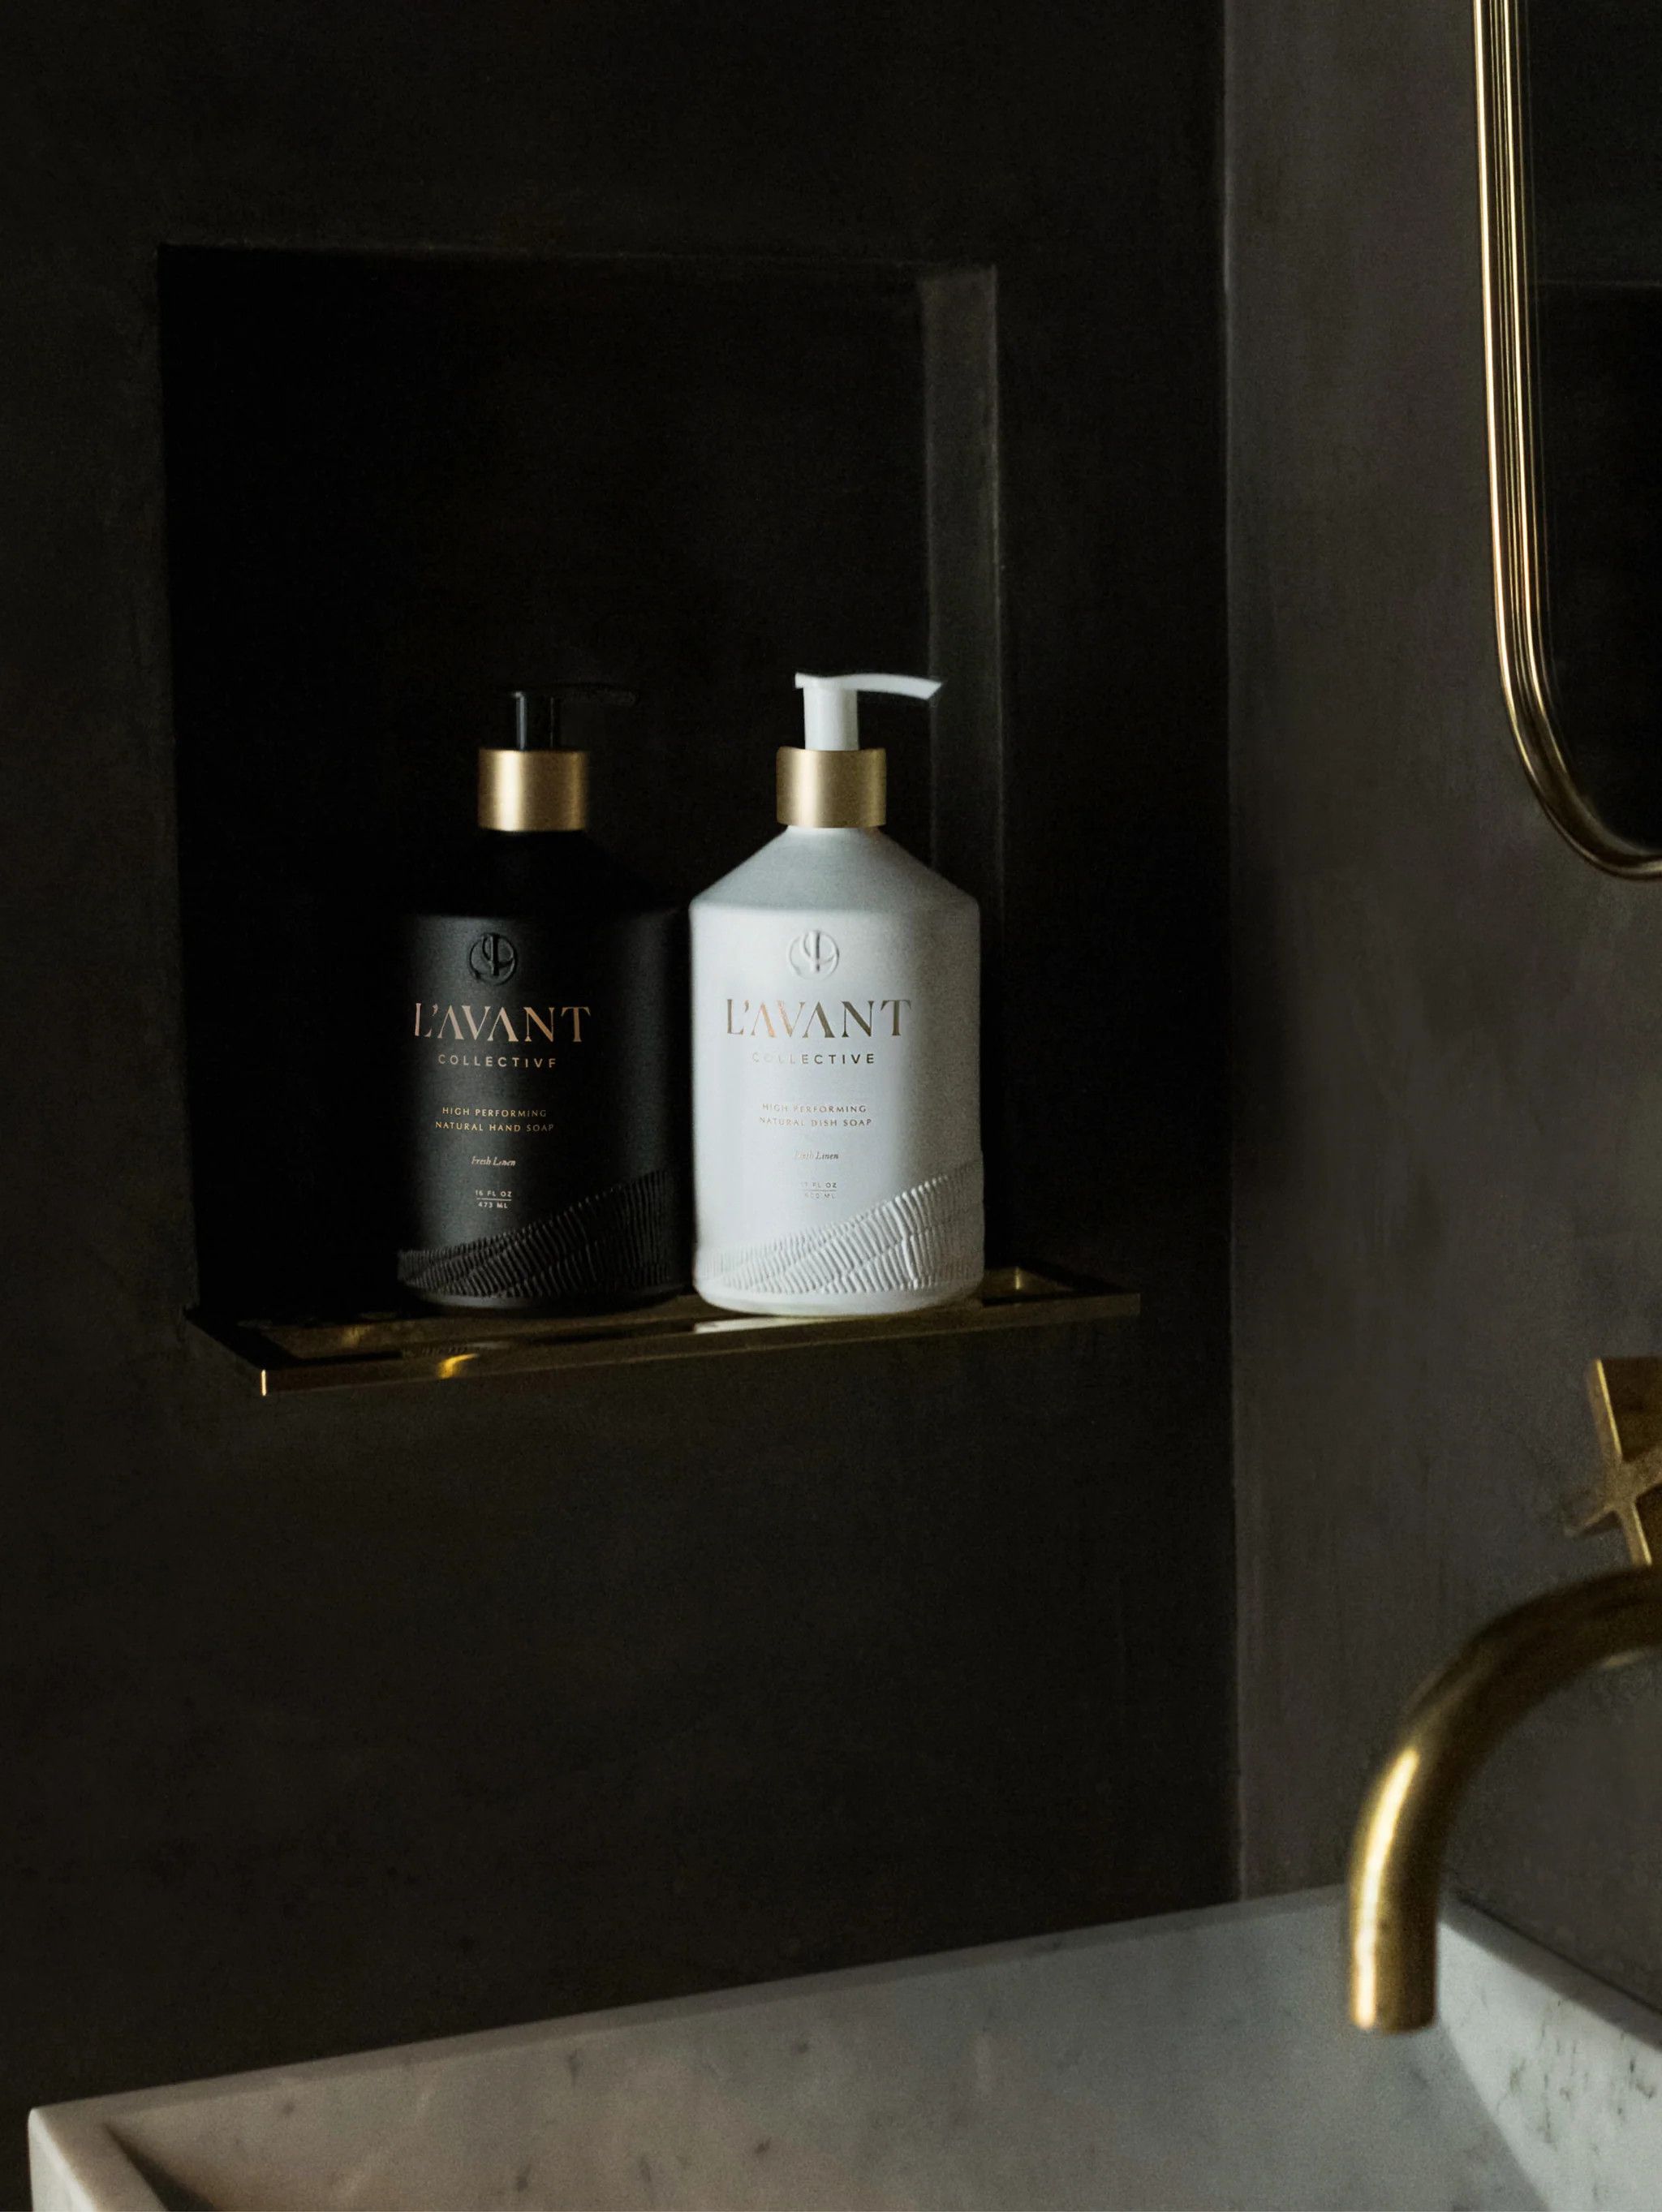 The High Performing Dish & Hand Soap Duo (Glass Bottles) | L'AVANT Collective